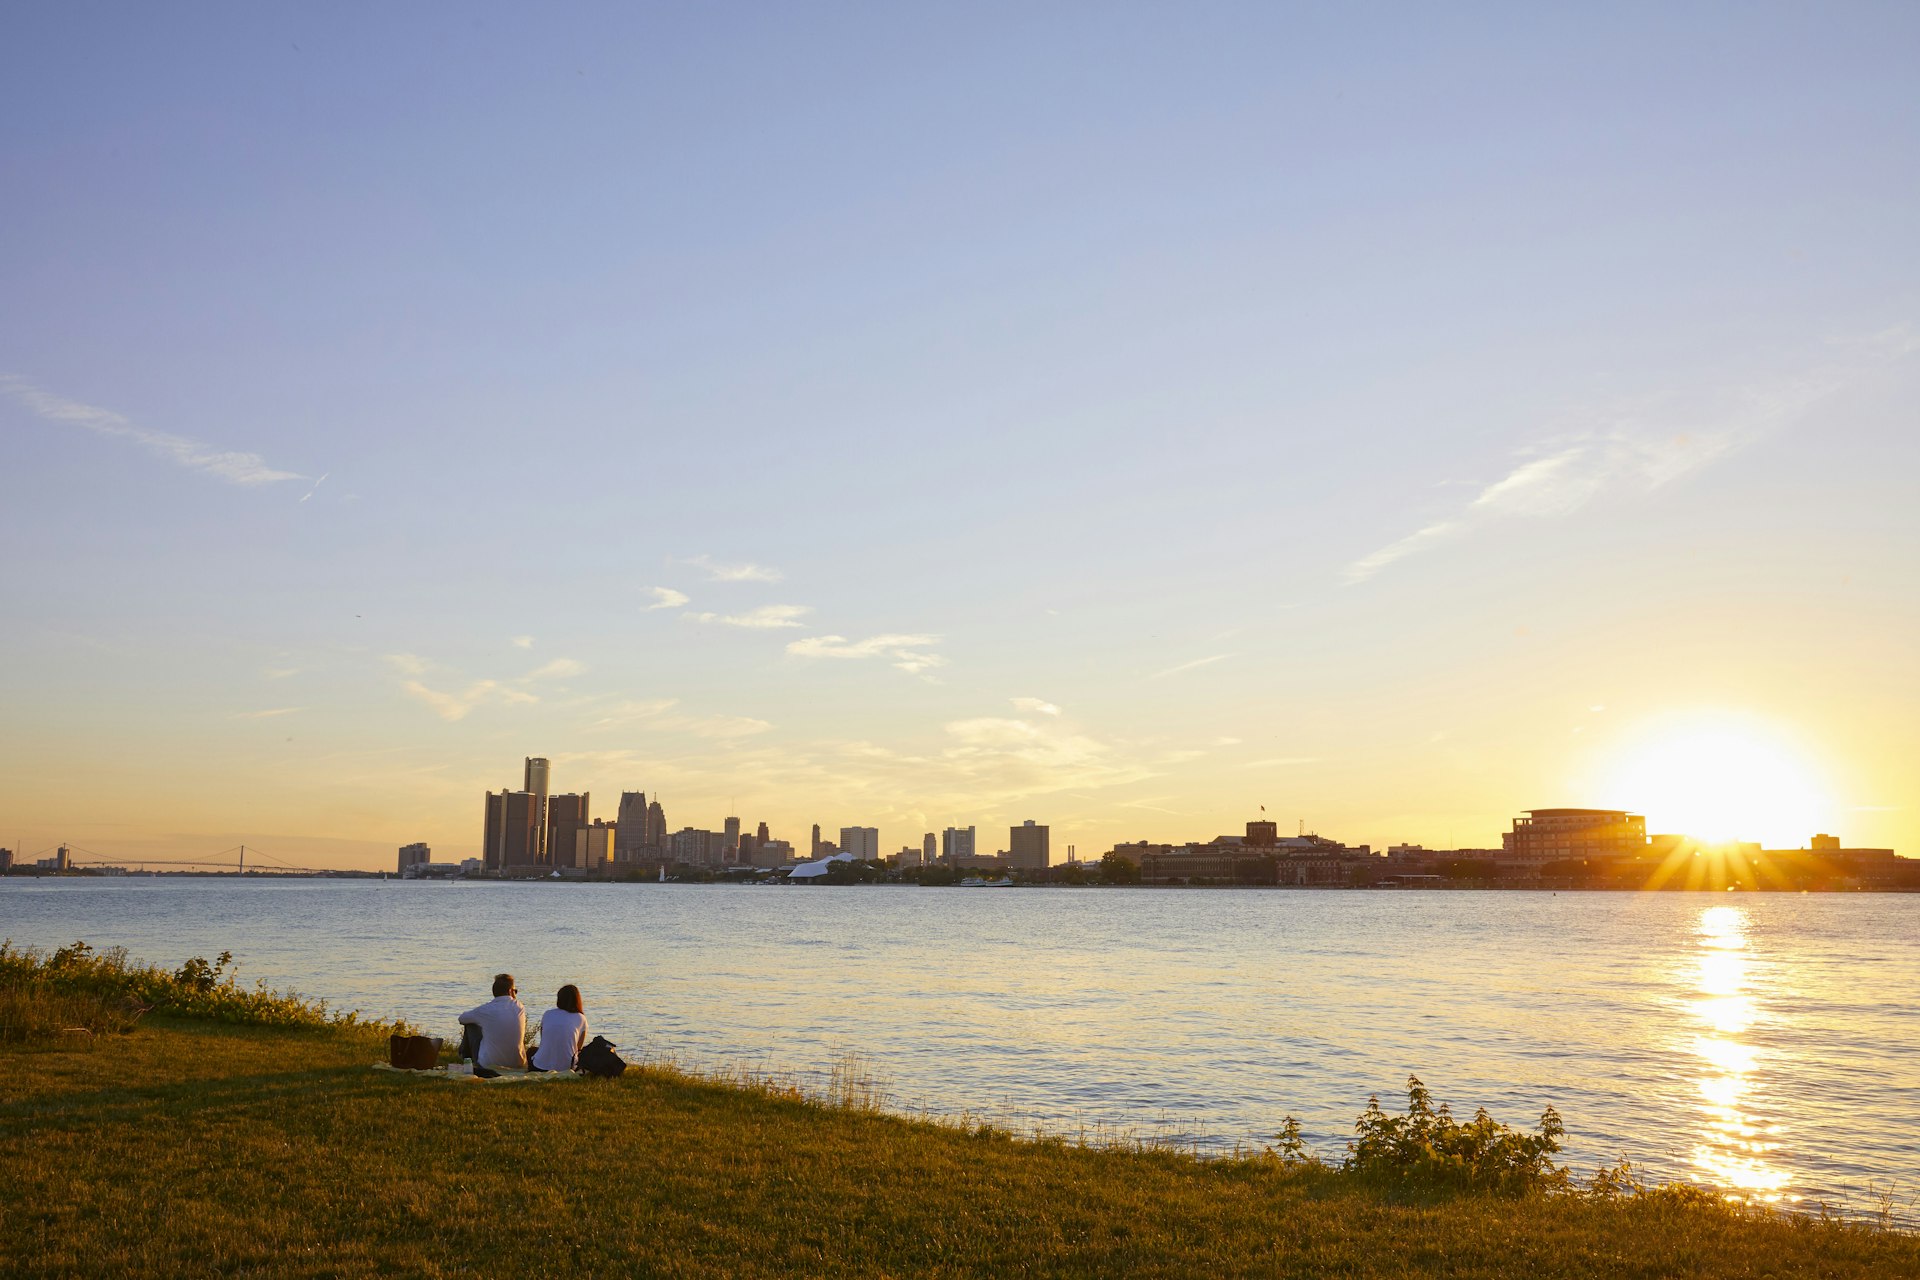 Two people watching the sun set over Detroit from across the river